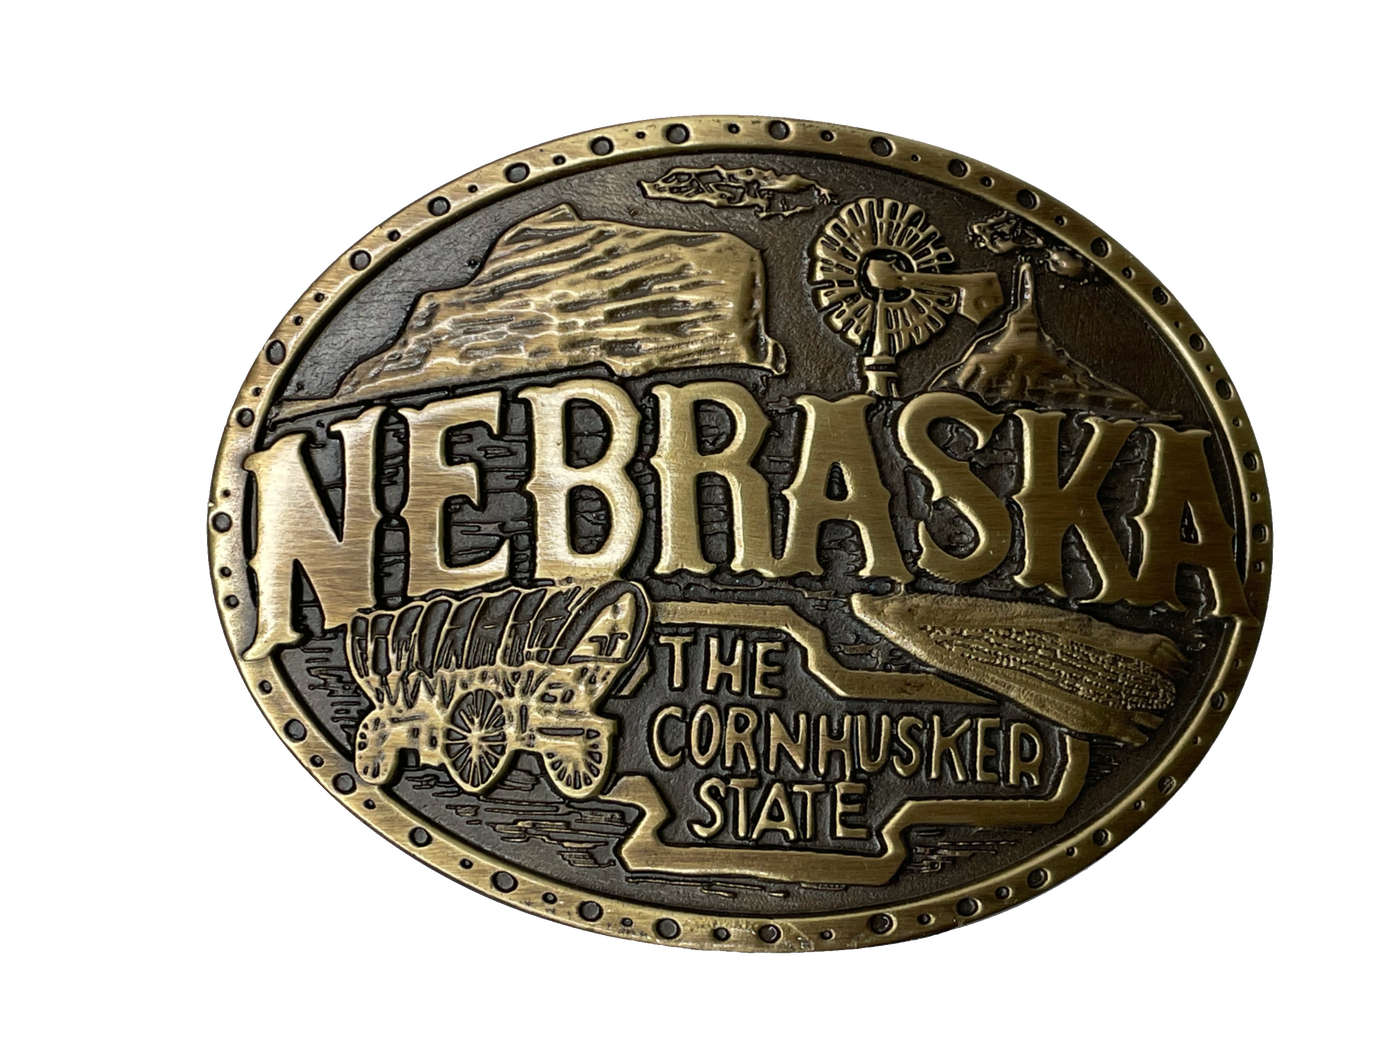 Nebraska State buckle by AndWest Dimensions are 3" tall by 3 3/4" wide Fits belts up to 1 1/2" wide Buckle is brass colored with Nebraska Cornhusker State embossed across front of buckle. Farming scene in the back behind "Nebraska". Back of buckle has Western scroll design Available in our online store and in the retail shop in Smyrna, TN, just outside of Nashville. Made in Mexico